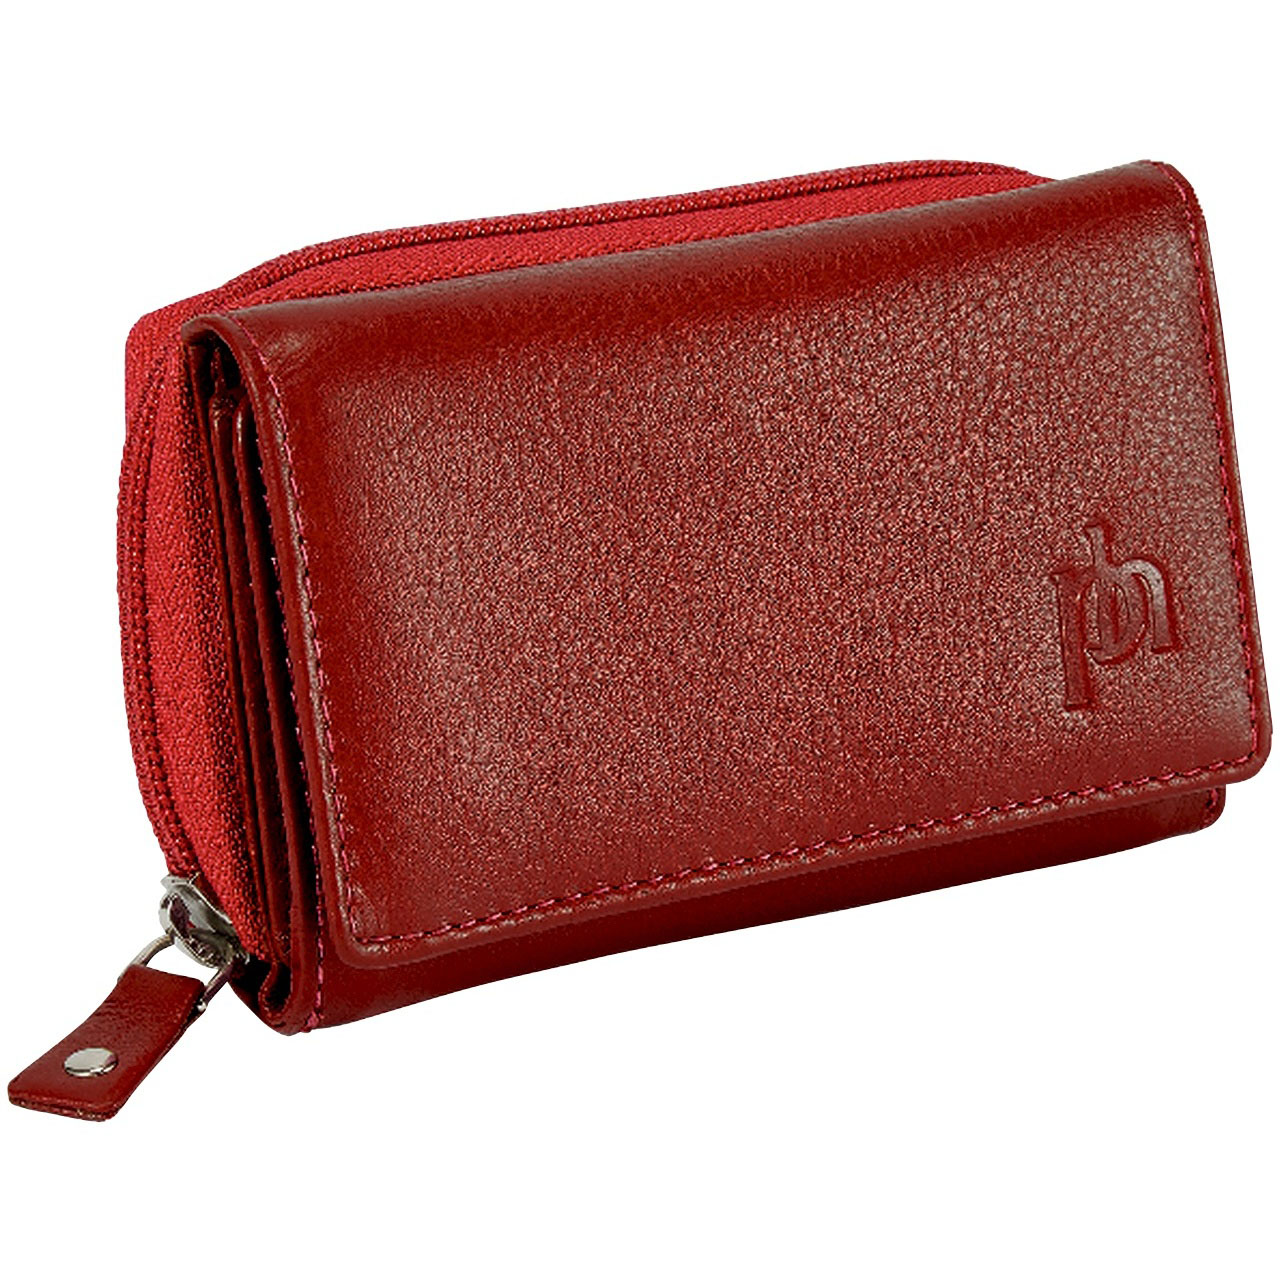 Womens Metal Frame Leather Purse Red | House of Leather